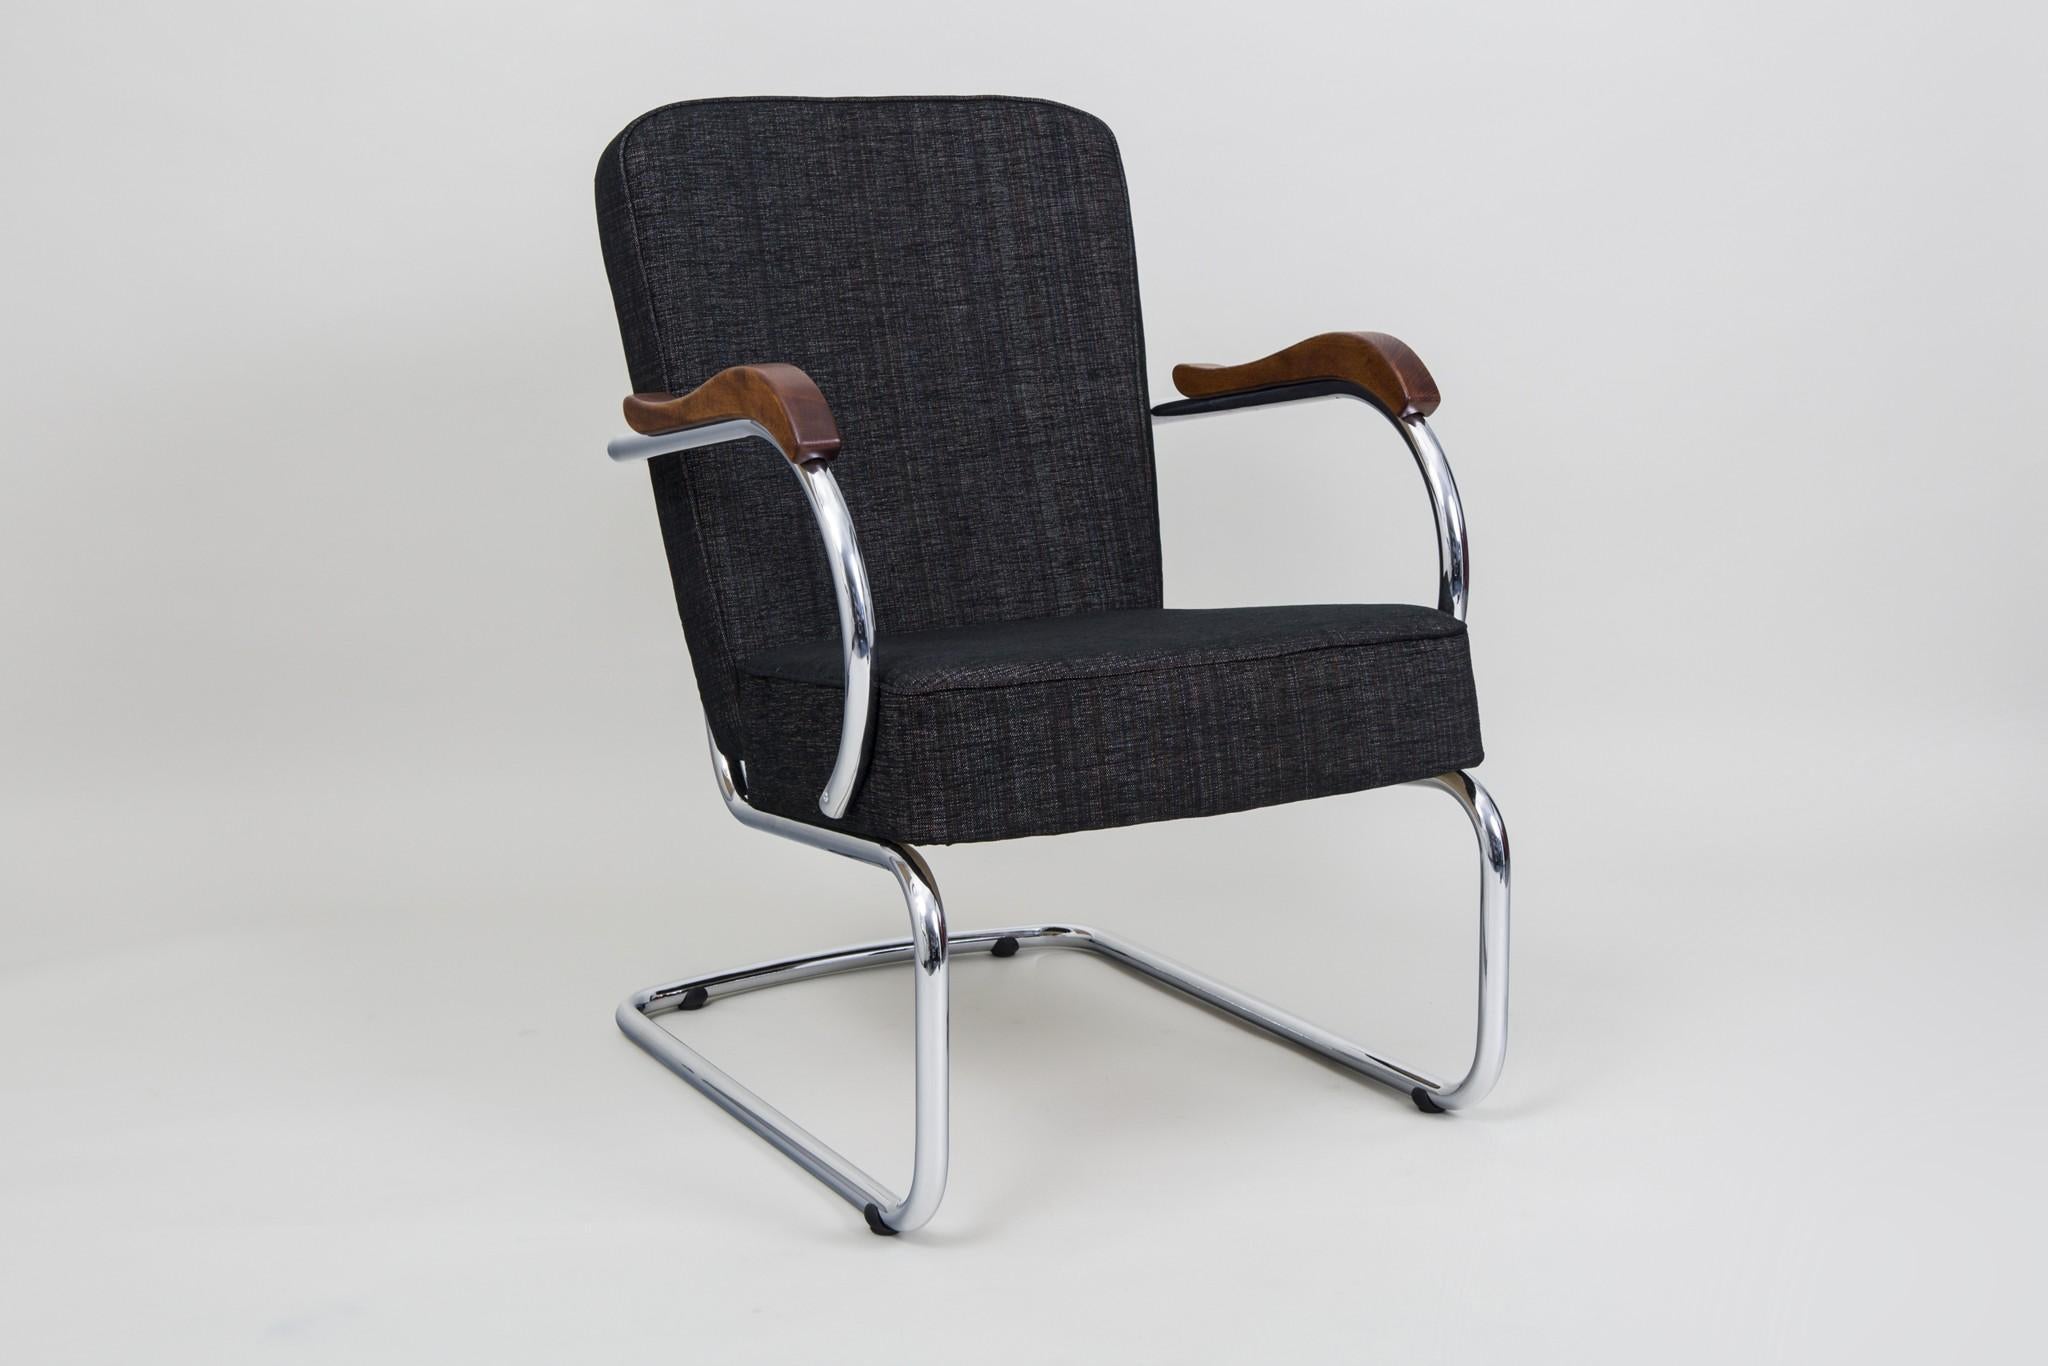 Bauhaus Art Deco armchairs
Completely restored, new upholstery
Material: Chrome-plated steel
Source: Czechoslovakia
Maker: Kovona
Period: 1930-1939.